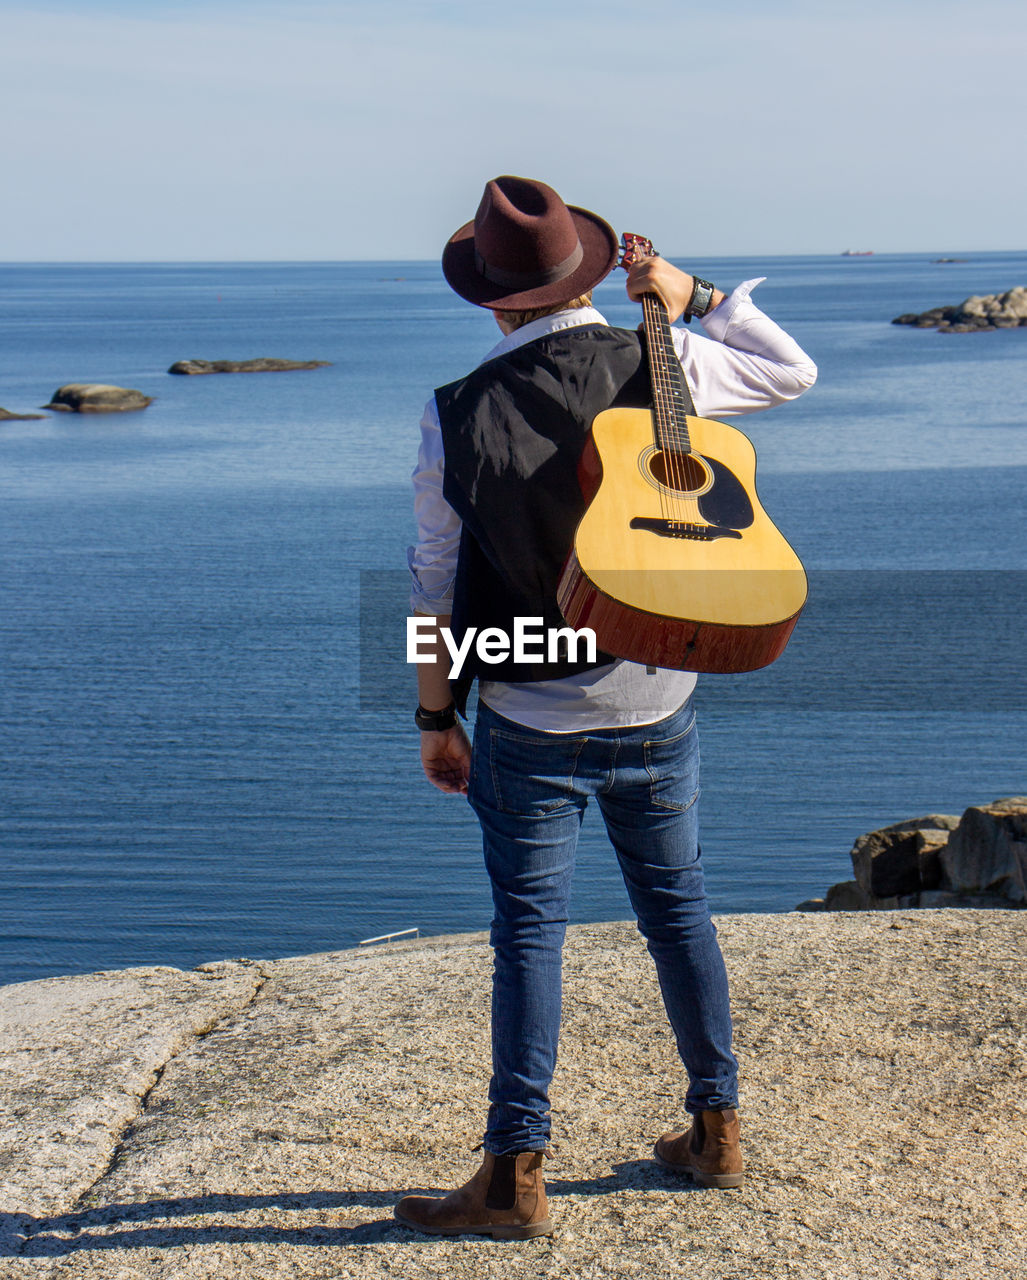 string instrument, water, sea, musical instrument, full length, beach, guitar, one person, music, blue, musician, casual clothing, standing, nature, hat, adult, land, coast, day, leisure activity, musical equipment, vacation, ocean, sky, men, sunlight, holding, clothing, arts culture and entertainment, rear view, shore, beauty in nature, person, outdoors, holiday, travel, trip, horizon over water, lifestyles, fashion accessory, young adult, violin, scenics - nature, jeans, plucking an instrument, sand